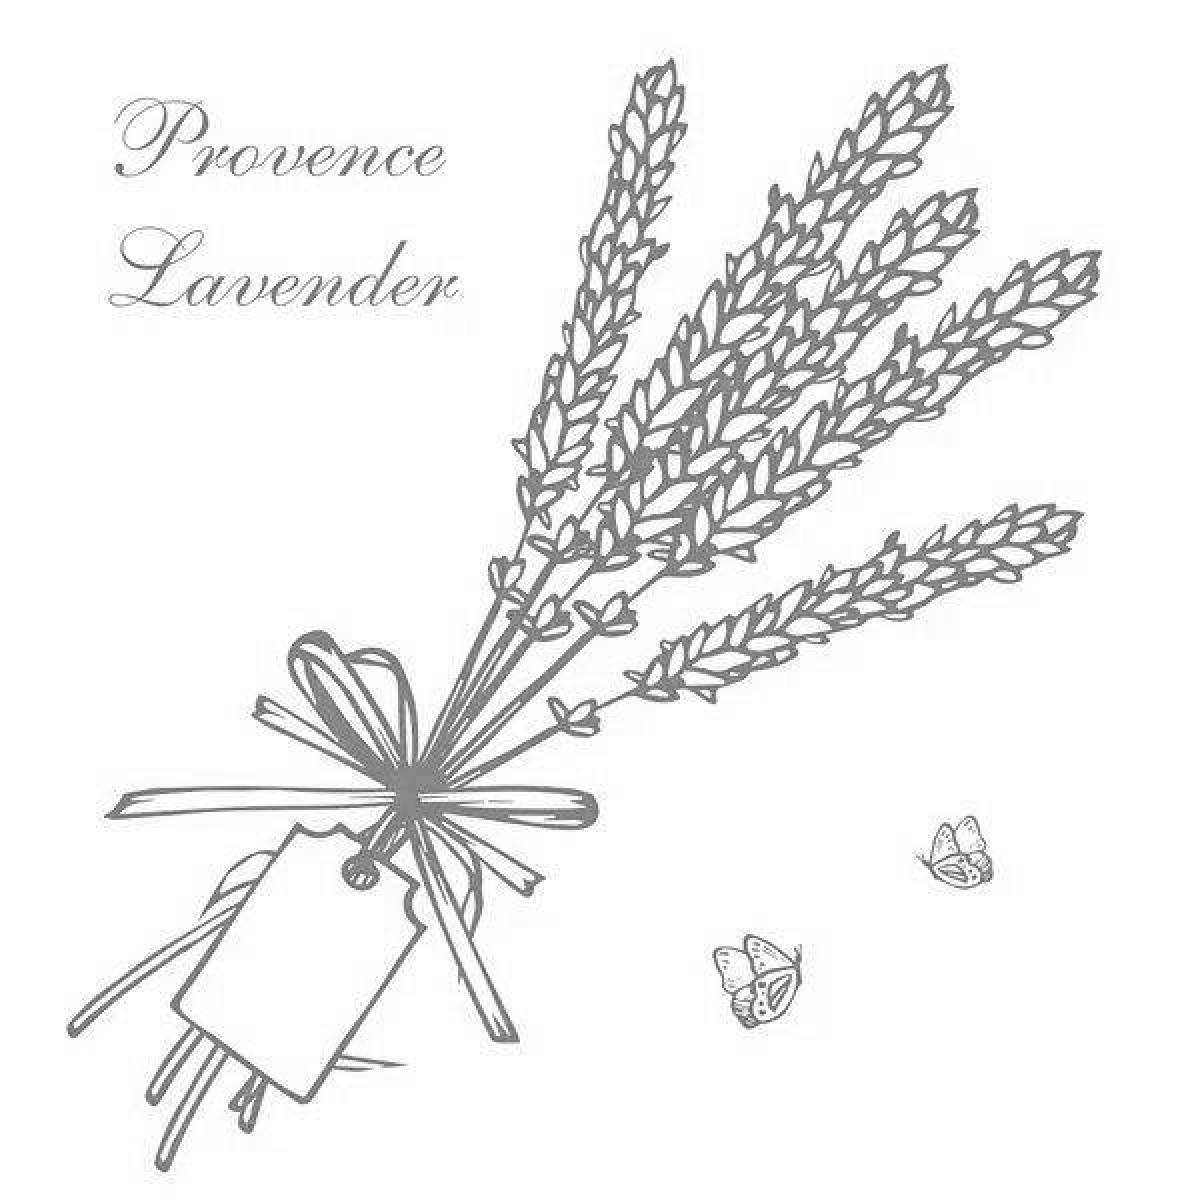 Colouring peaceful lavender